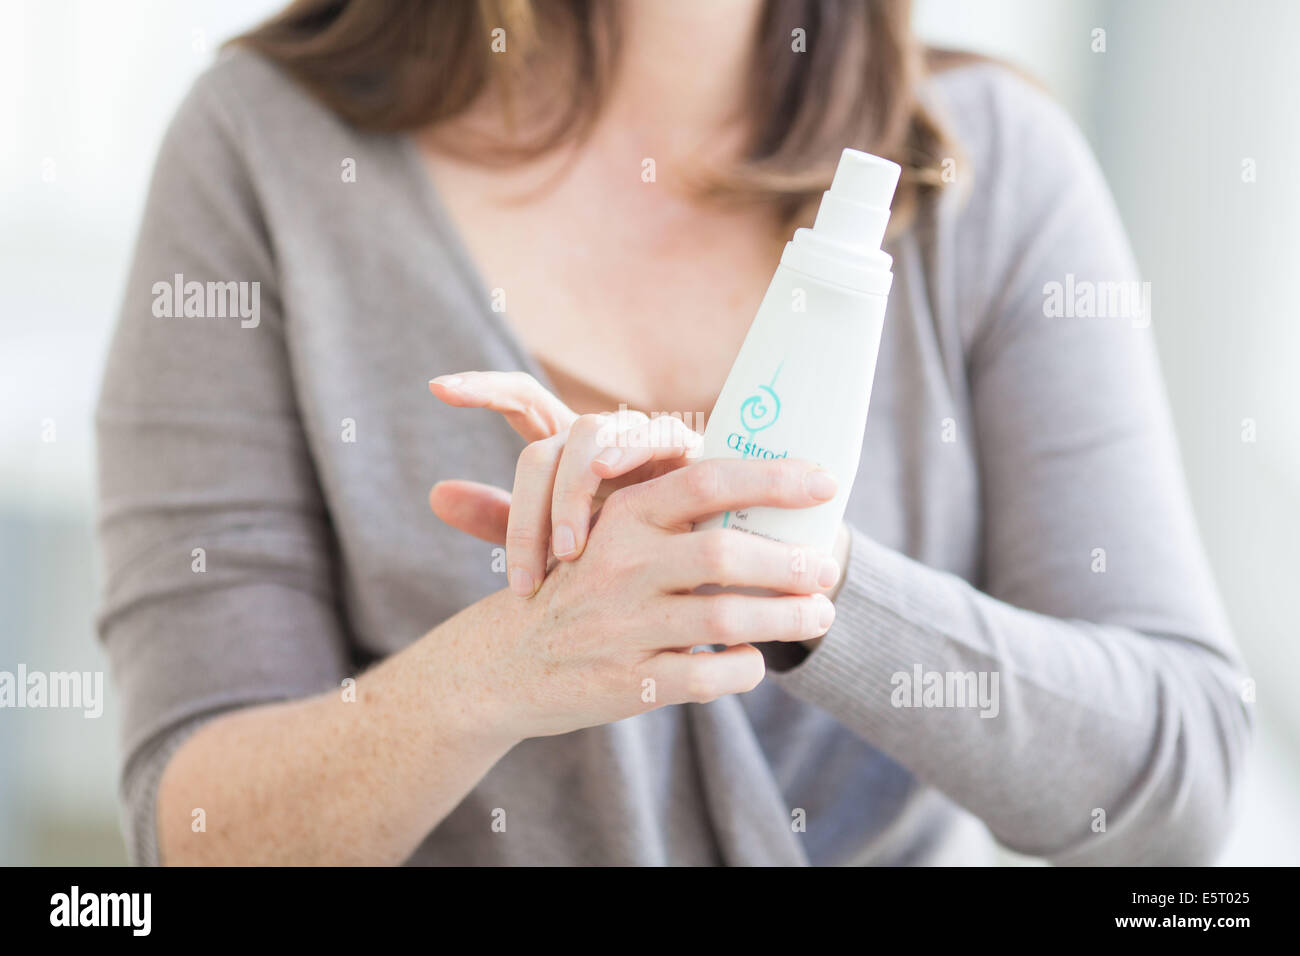 Woman applying an estrogen gel on her hands for a Hormone Replacement Therapy, in order to releive the undesirable effects of Stock Photo